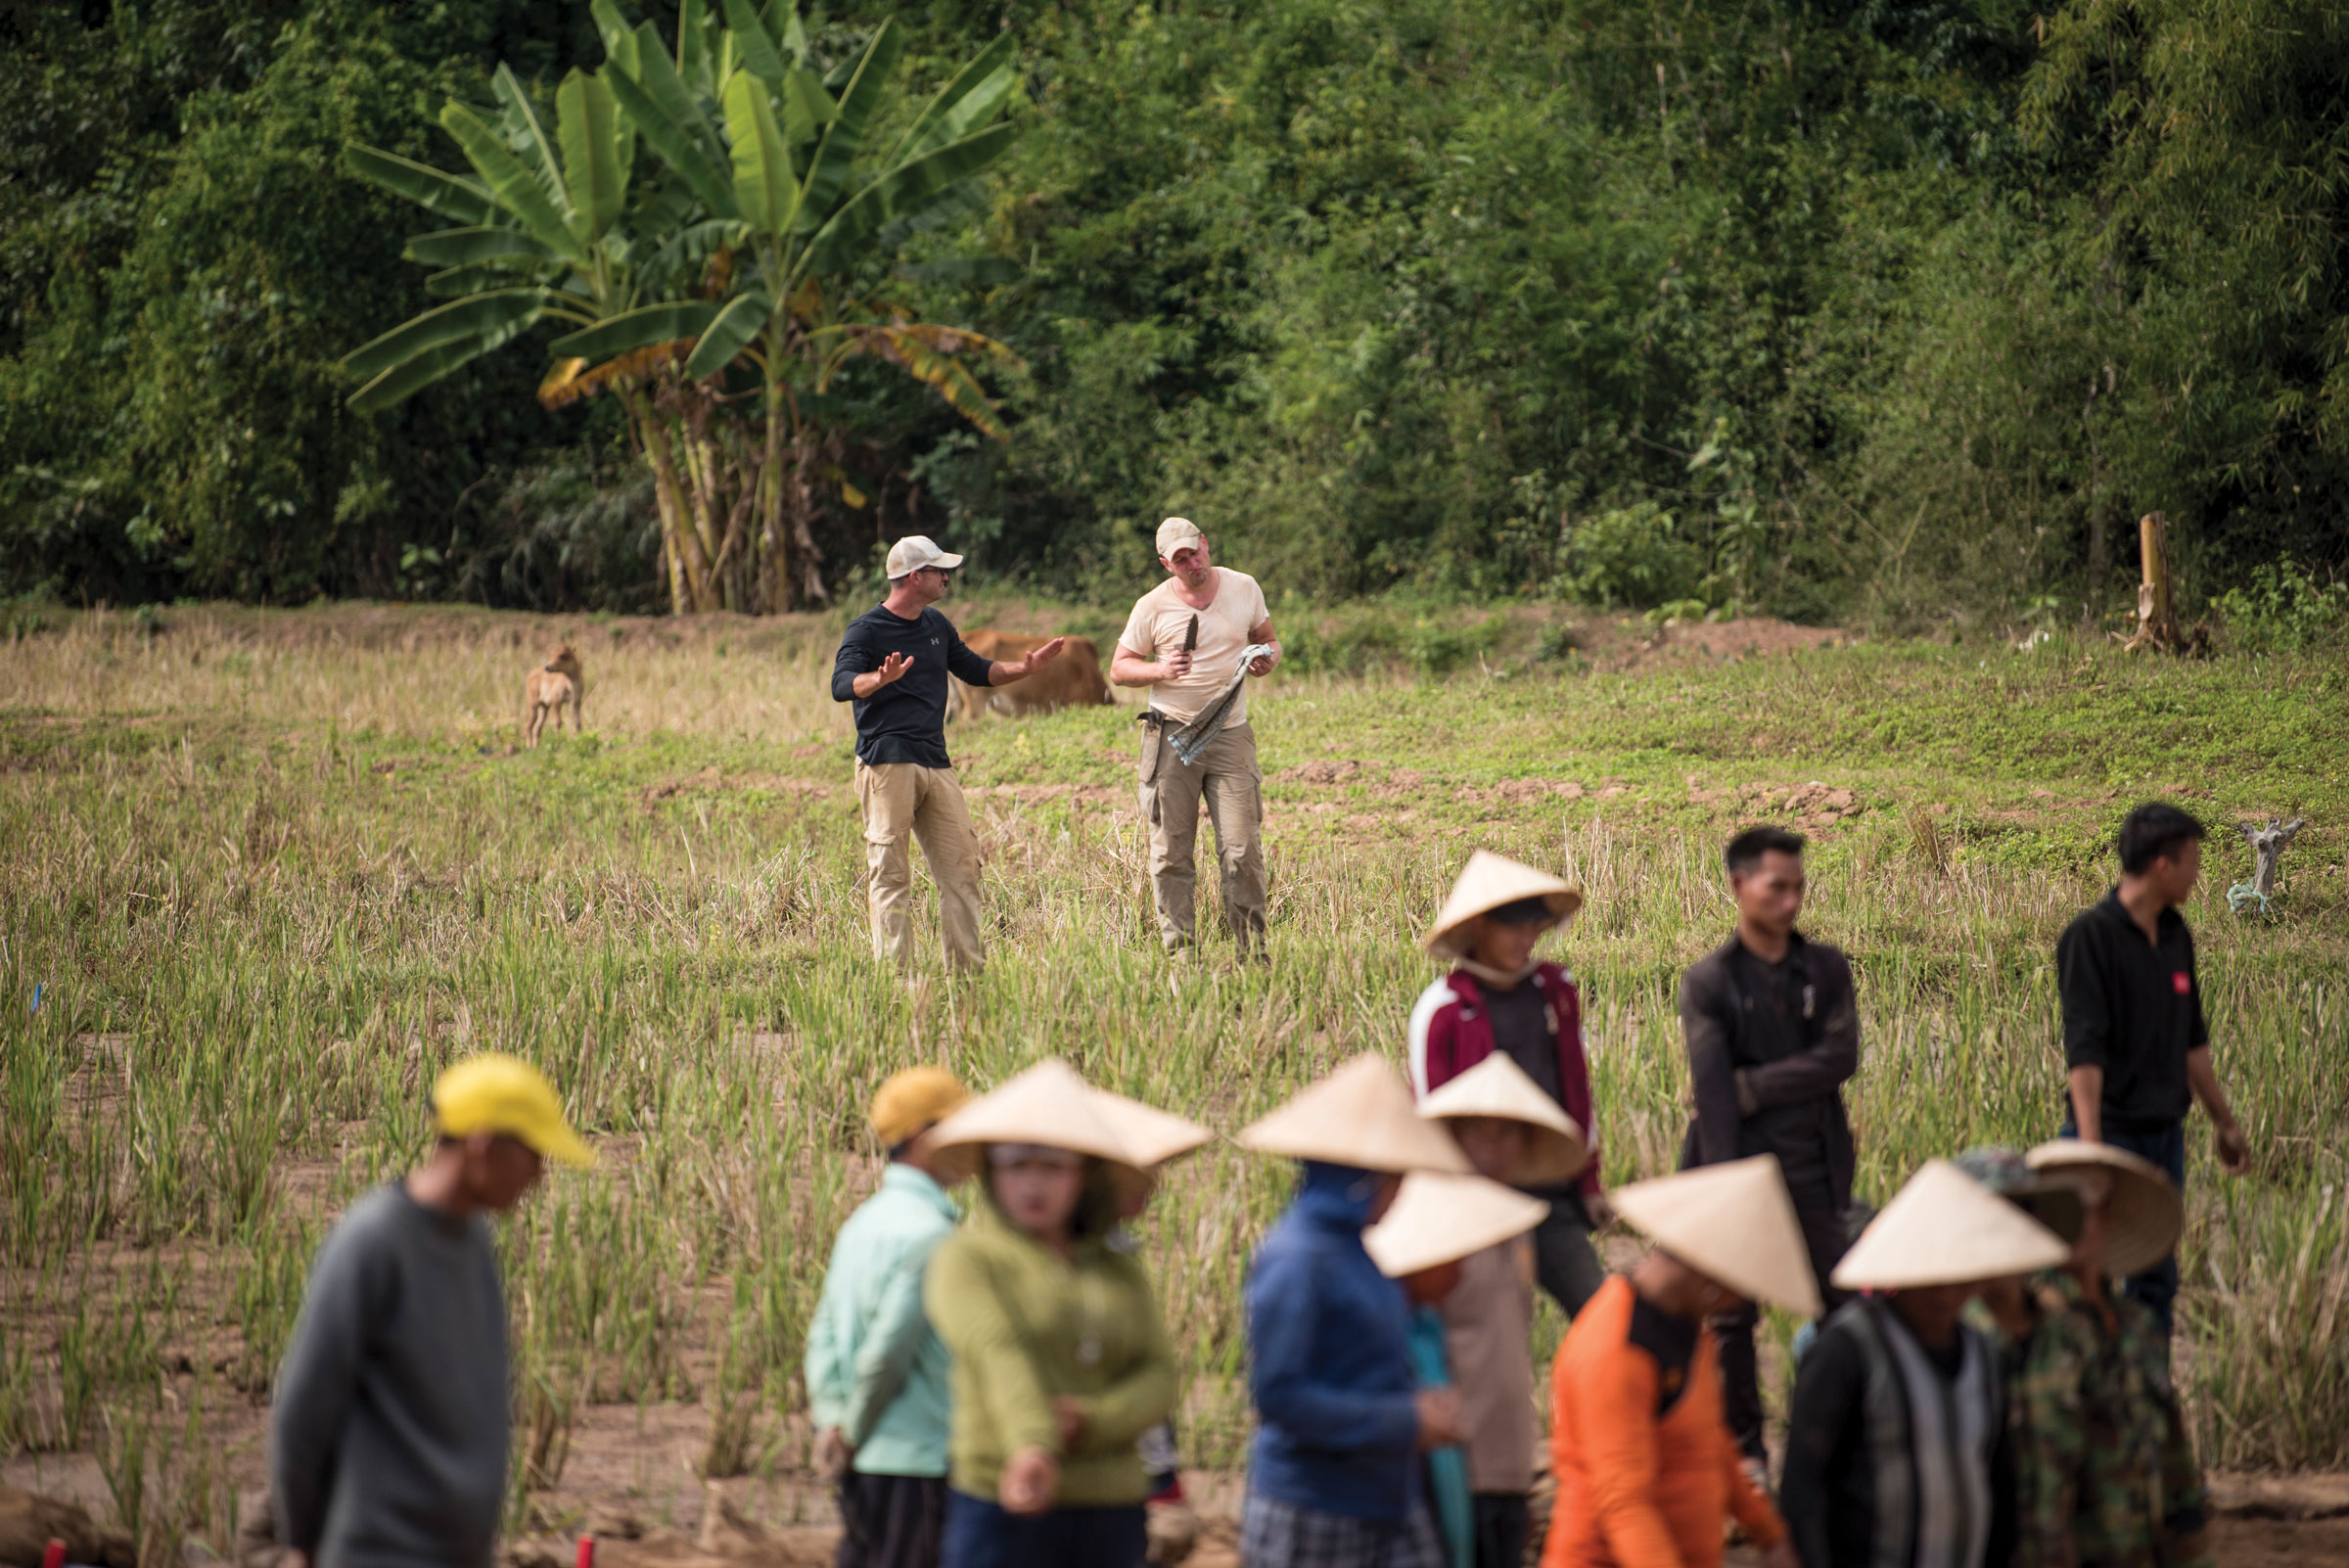 Two men trade notes in the background. In the foreground are villagers and workers, some wearing conical farming hats